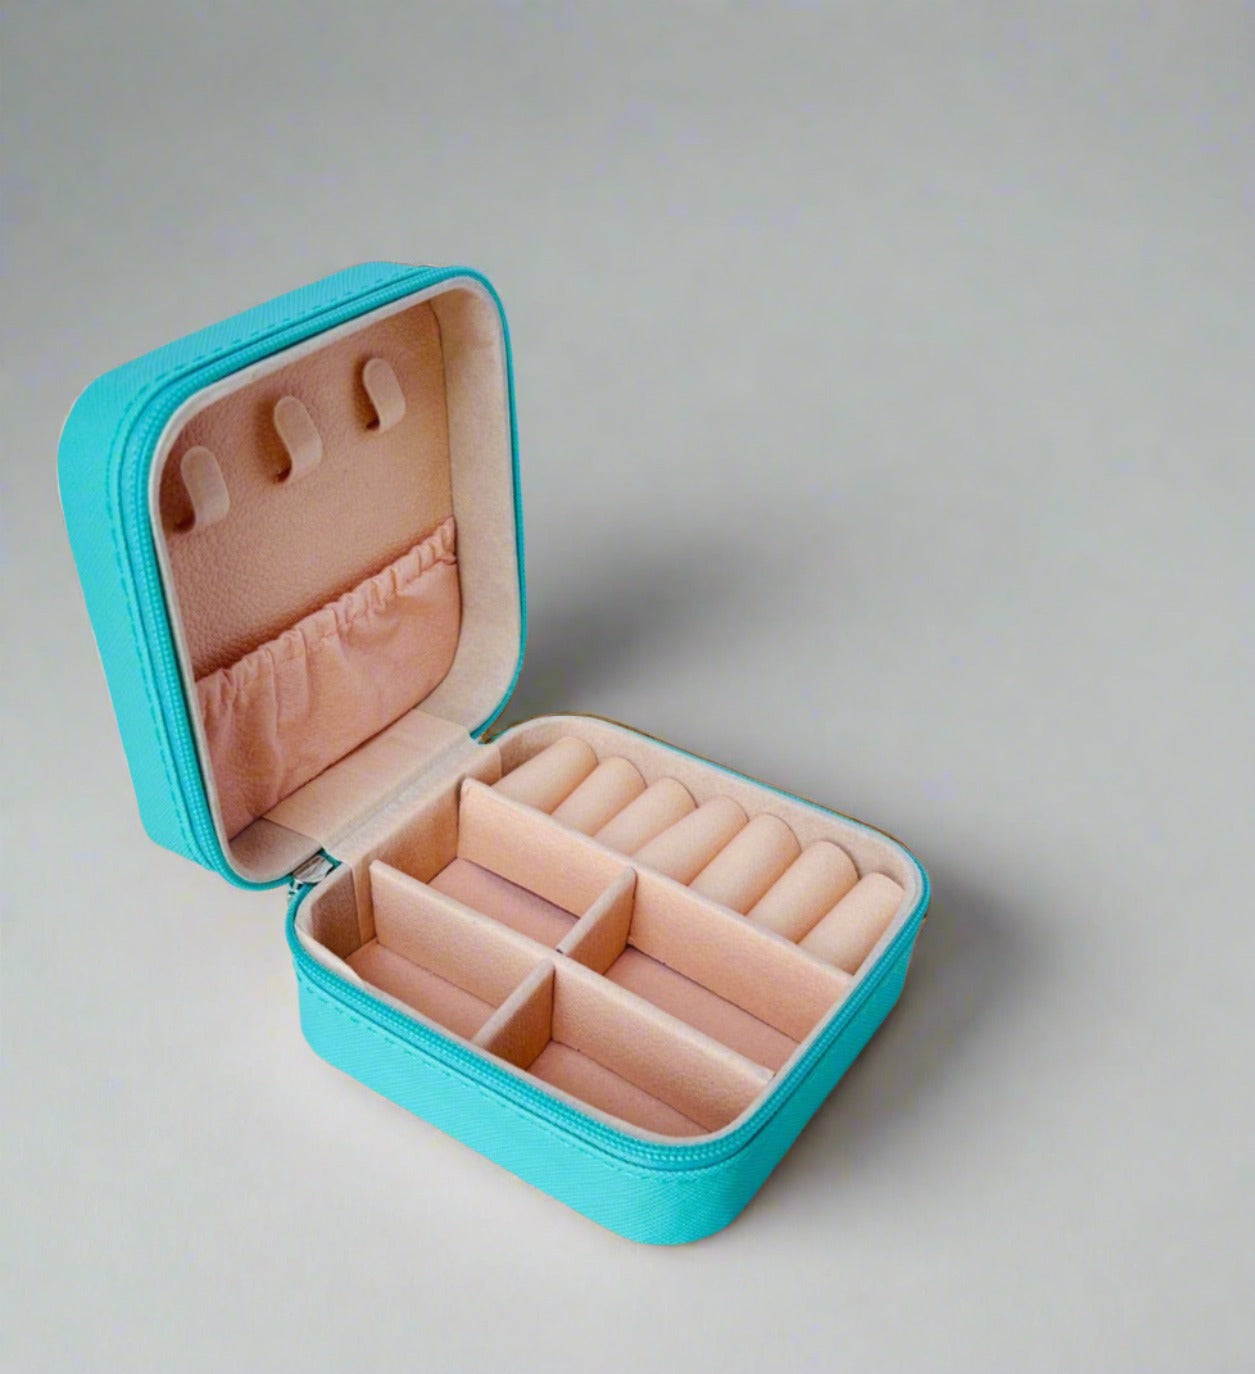 small jewelry box for women in blue, perfect for short travels